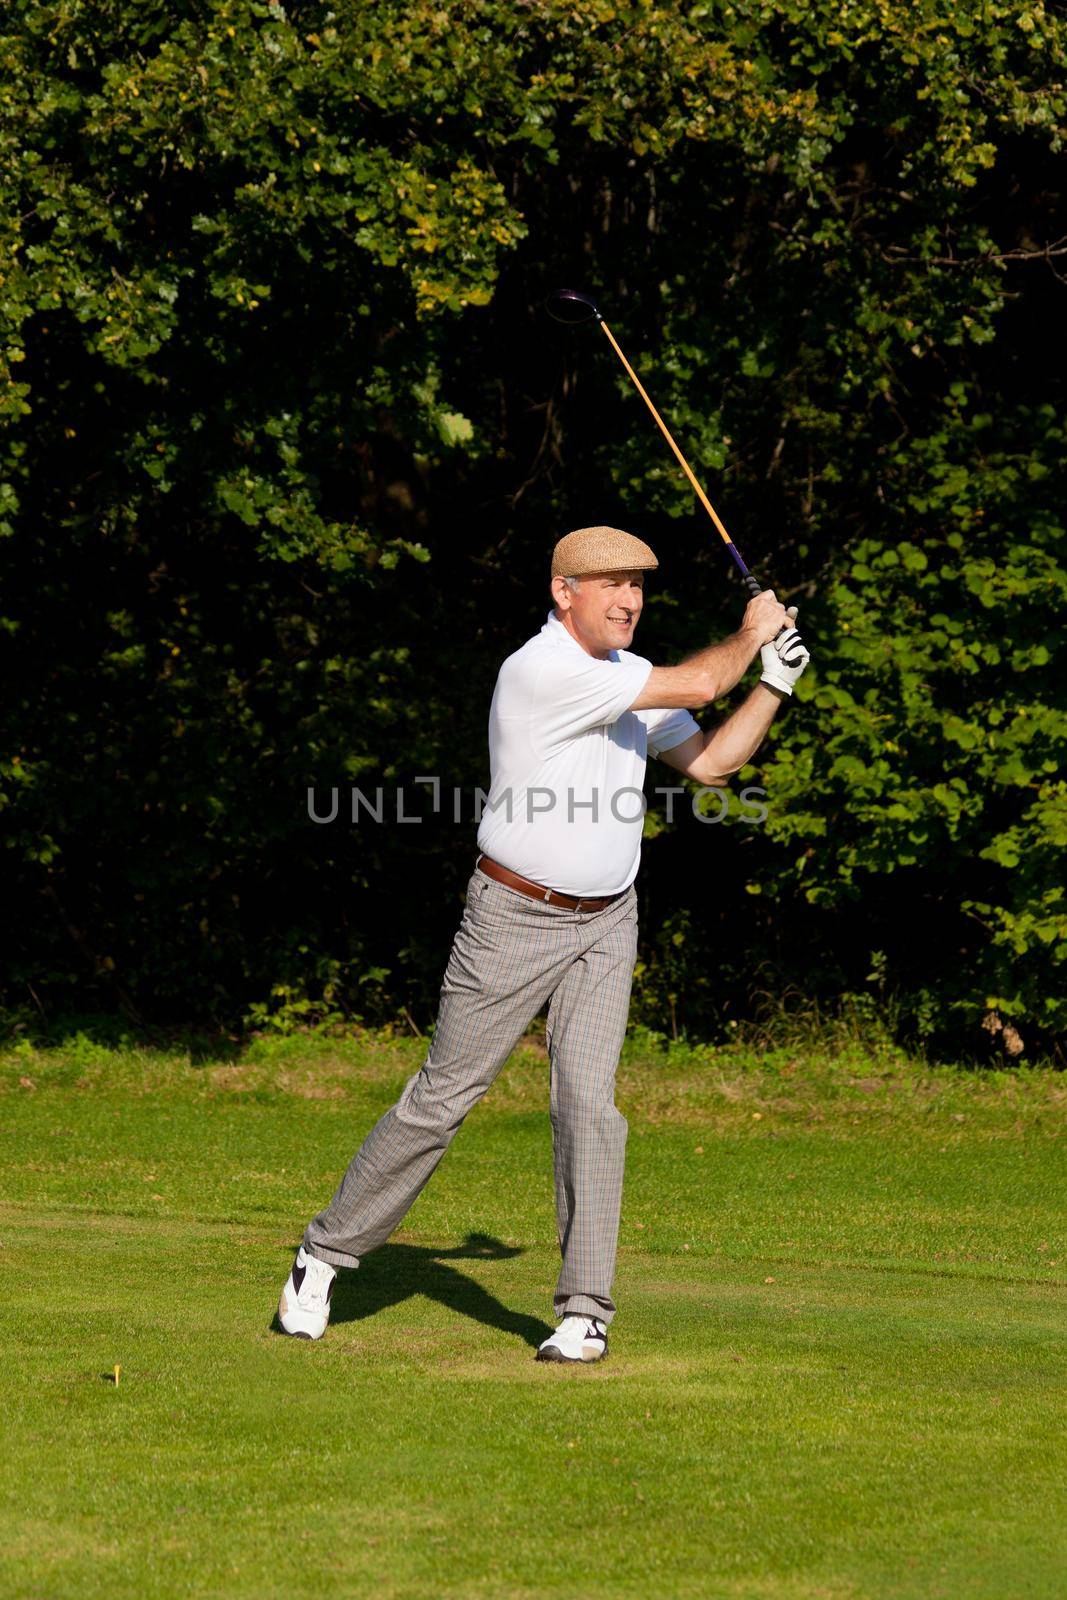 Senior golfer doing a golf stroke, he is playing on a wonderful summer afternoon